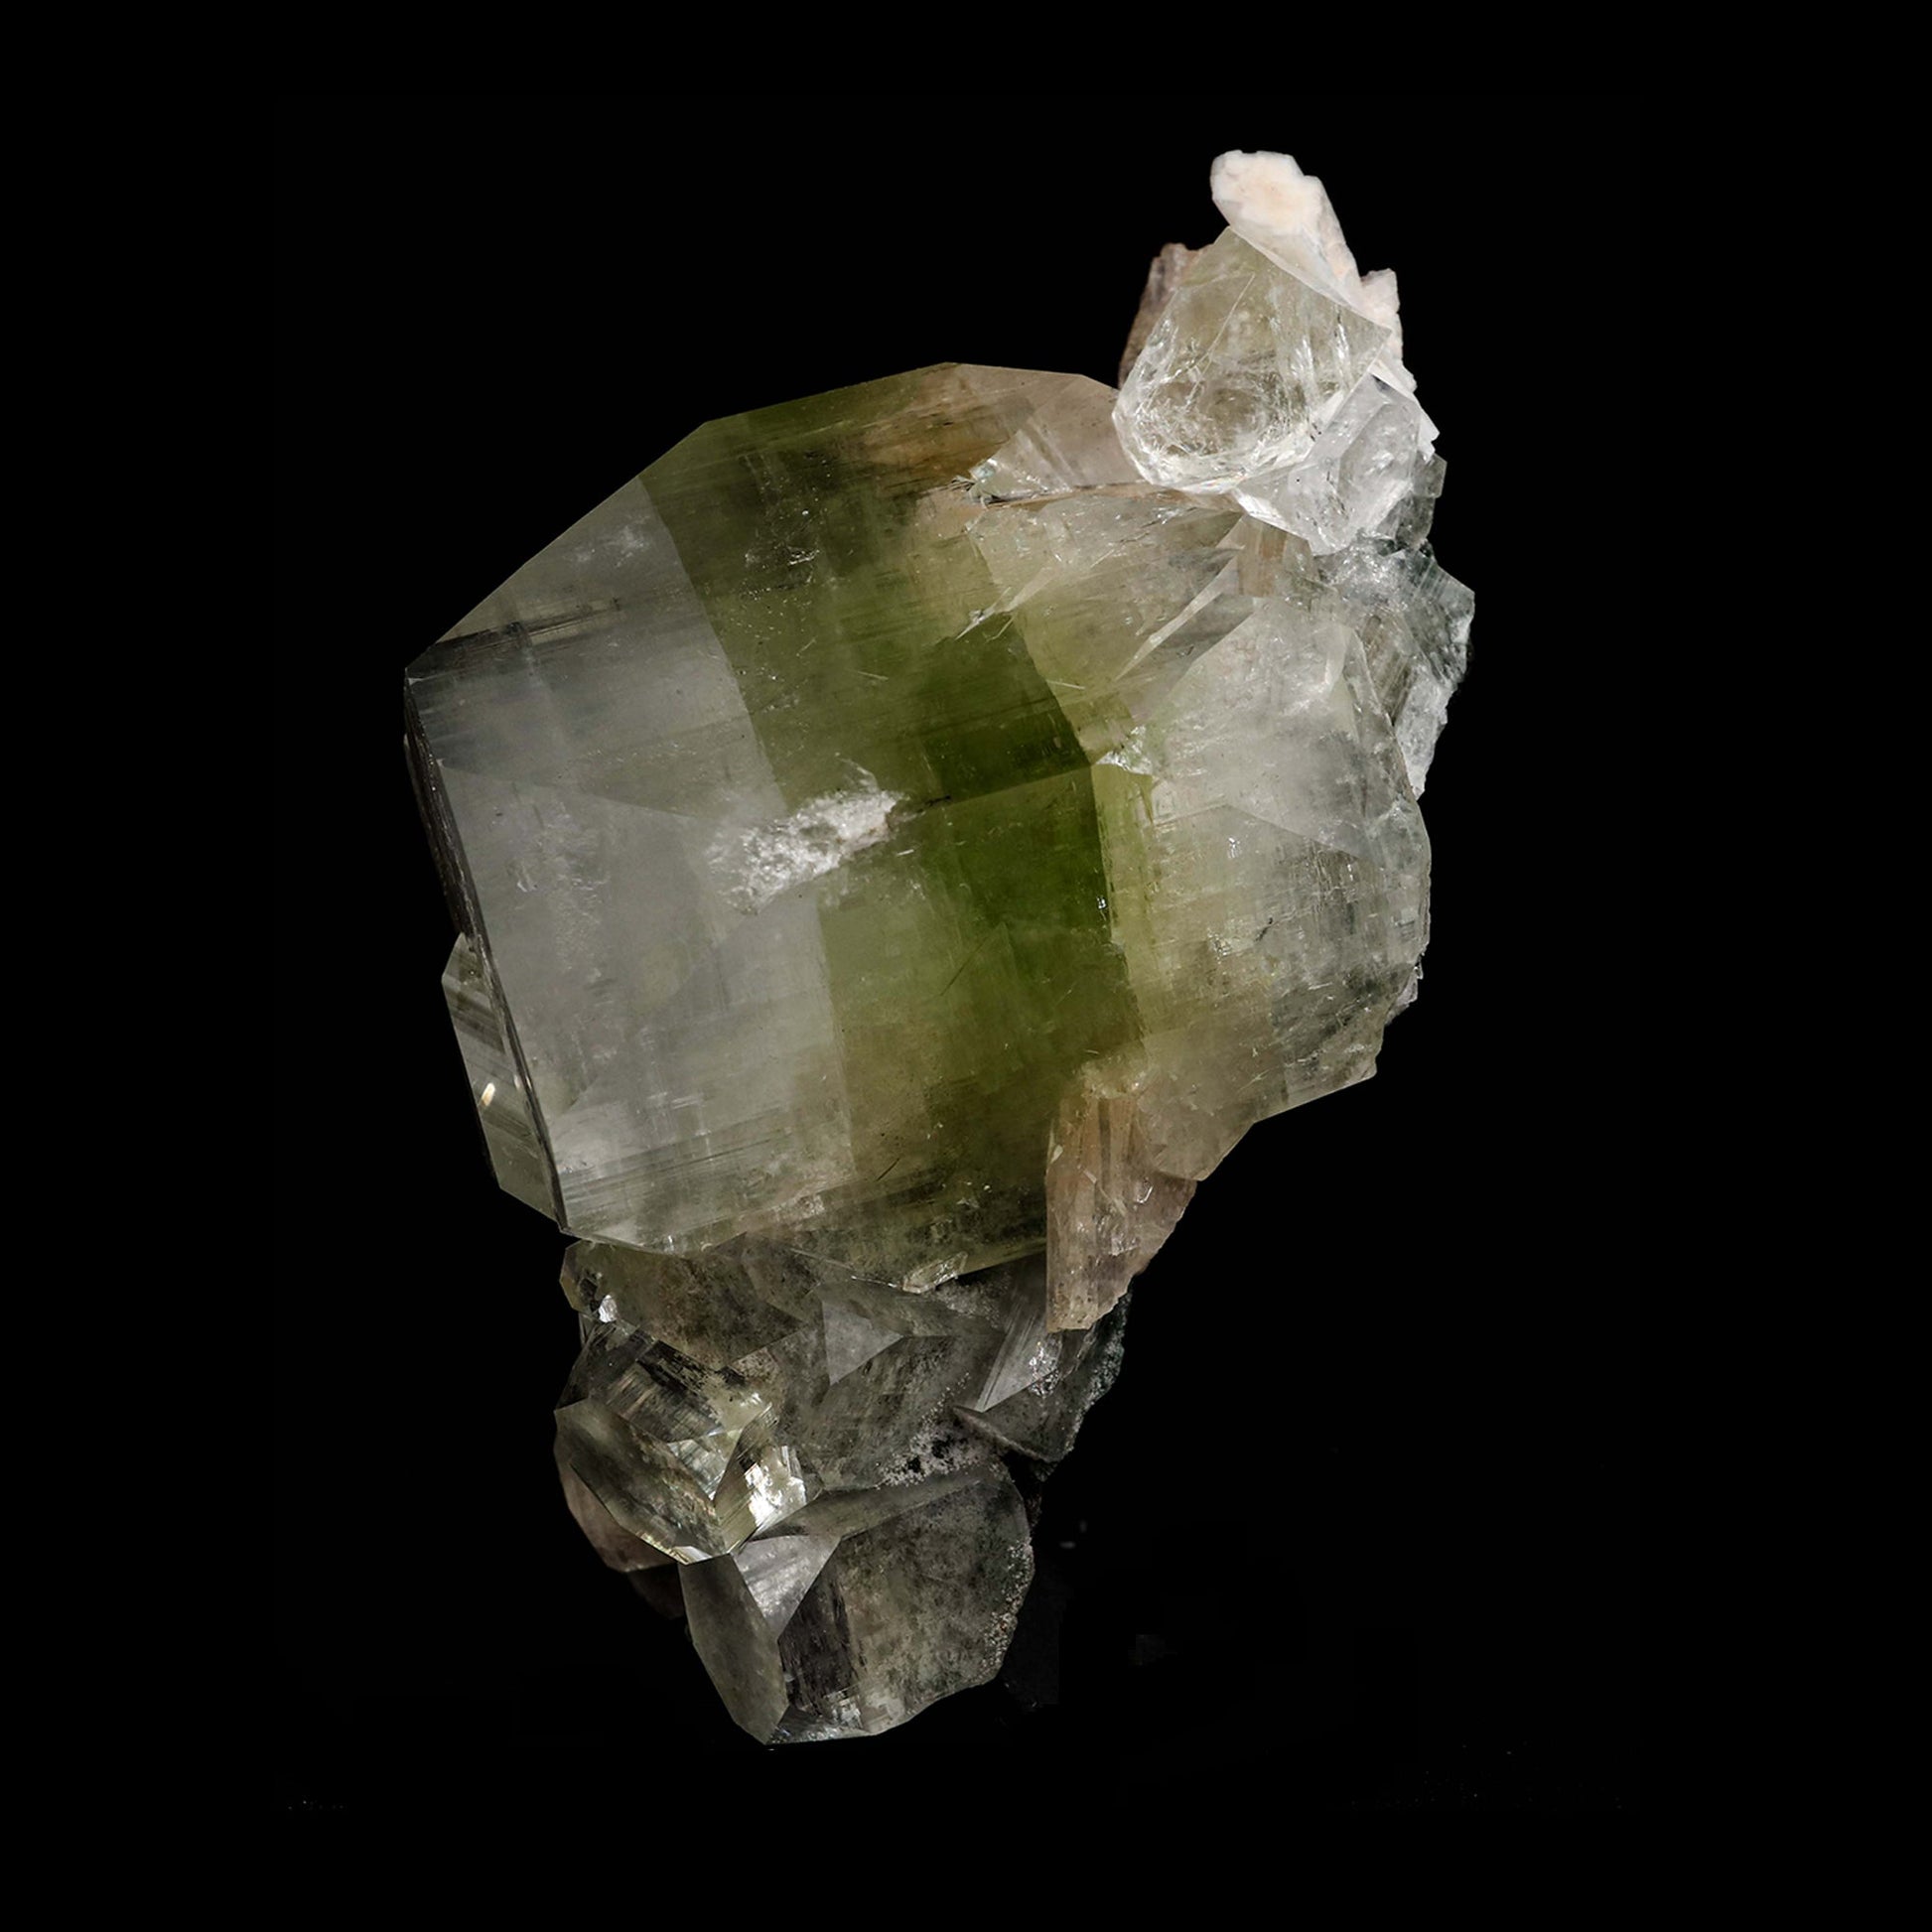 Green Apophyllite with Stilbite Natural Mineral Specimen # B 5192  https://www.superbminerals.us/products/green-apophyllite-with-stilbite-natural-mineral-specimen-b-5191  Features: A beautiful specimen of lustrous, radiating clusters of transparent green Apophyllite crystals on a plate of contrasting Stilbite crystals. These unusual Apophyllite crystals have flat terminations and the radiating, round-like clusters are incredibly aesthetic.&nbsp;This is a great piece in excellent